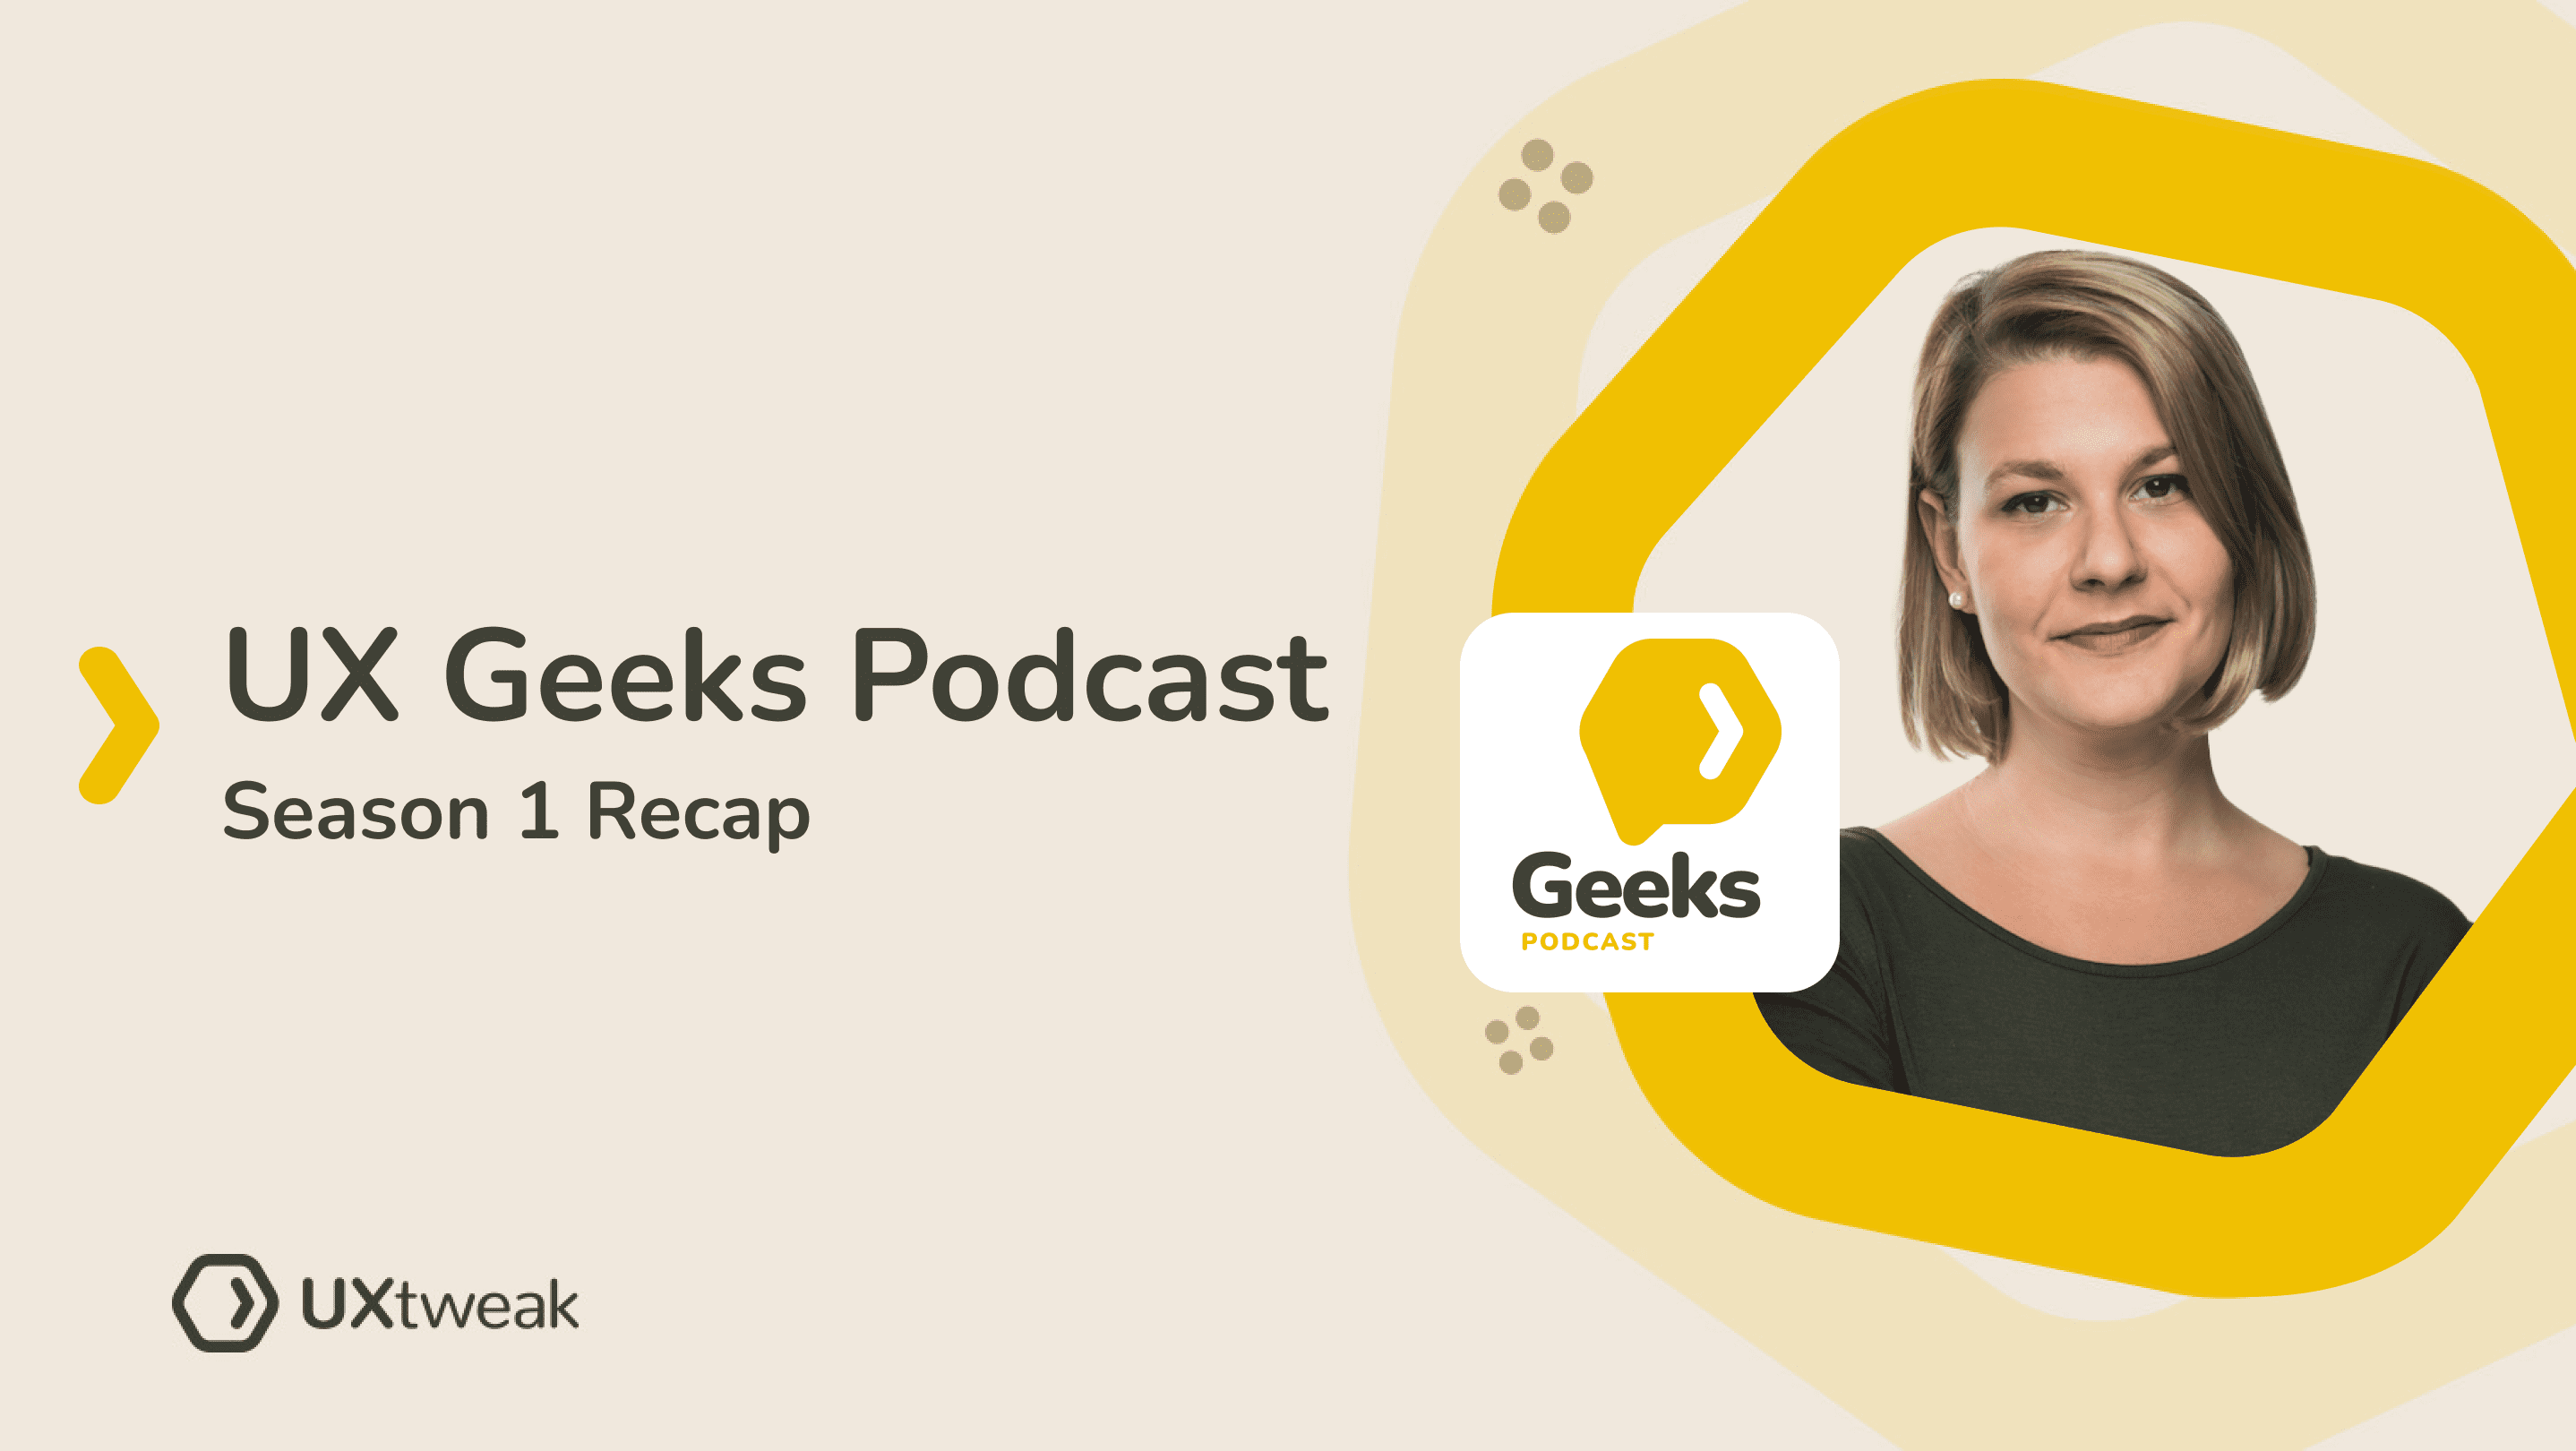 Everything You’ve Missed in Season 1 of UX Geeks Podcast